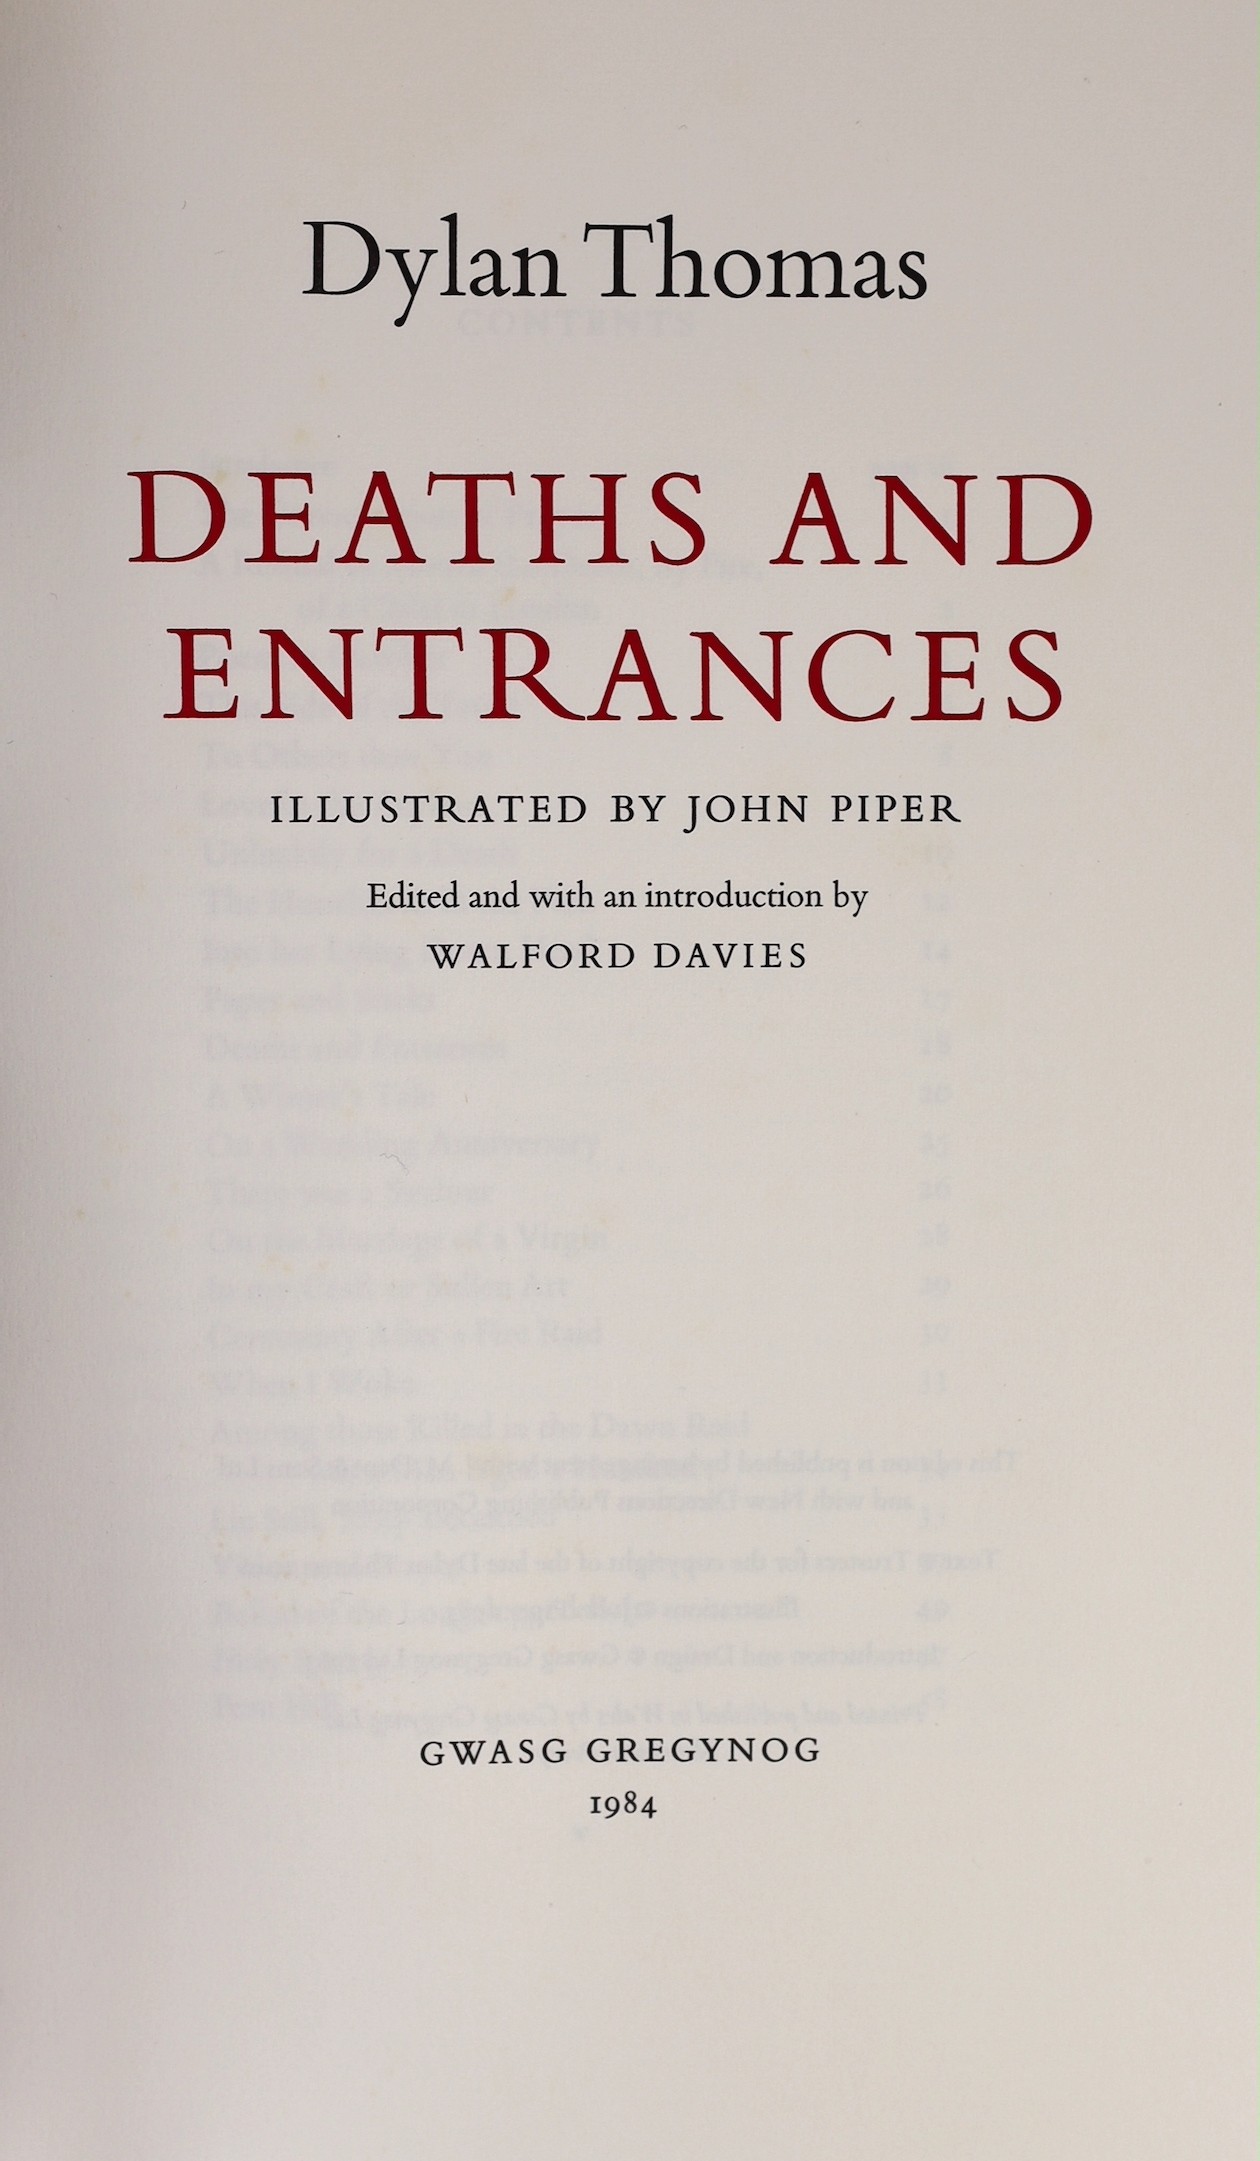 Thomas, Dylan - Deaths and Entrances, one of 250, illustrated by John Piper with coloured frontis and 7 double page plates, folio, blue quarter morocco cloth covered boards, Gwasg Gregynog, Newtown, 1984, in slip case.